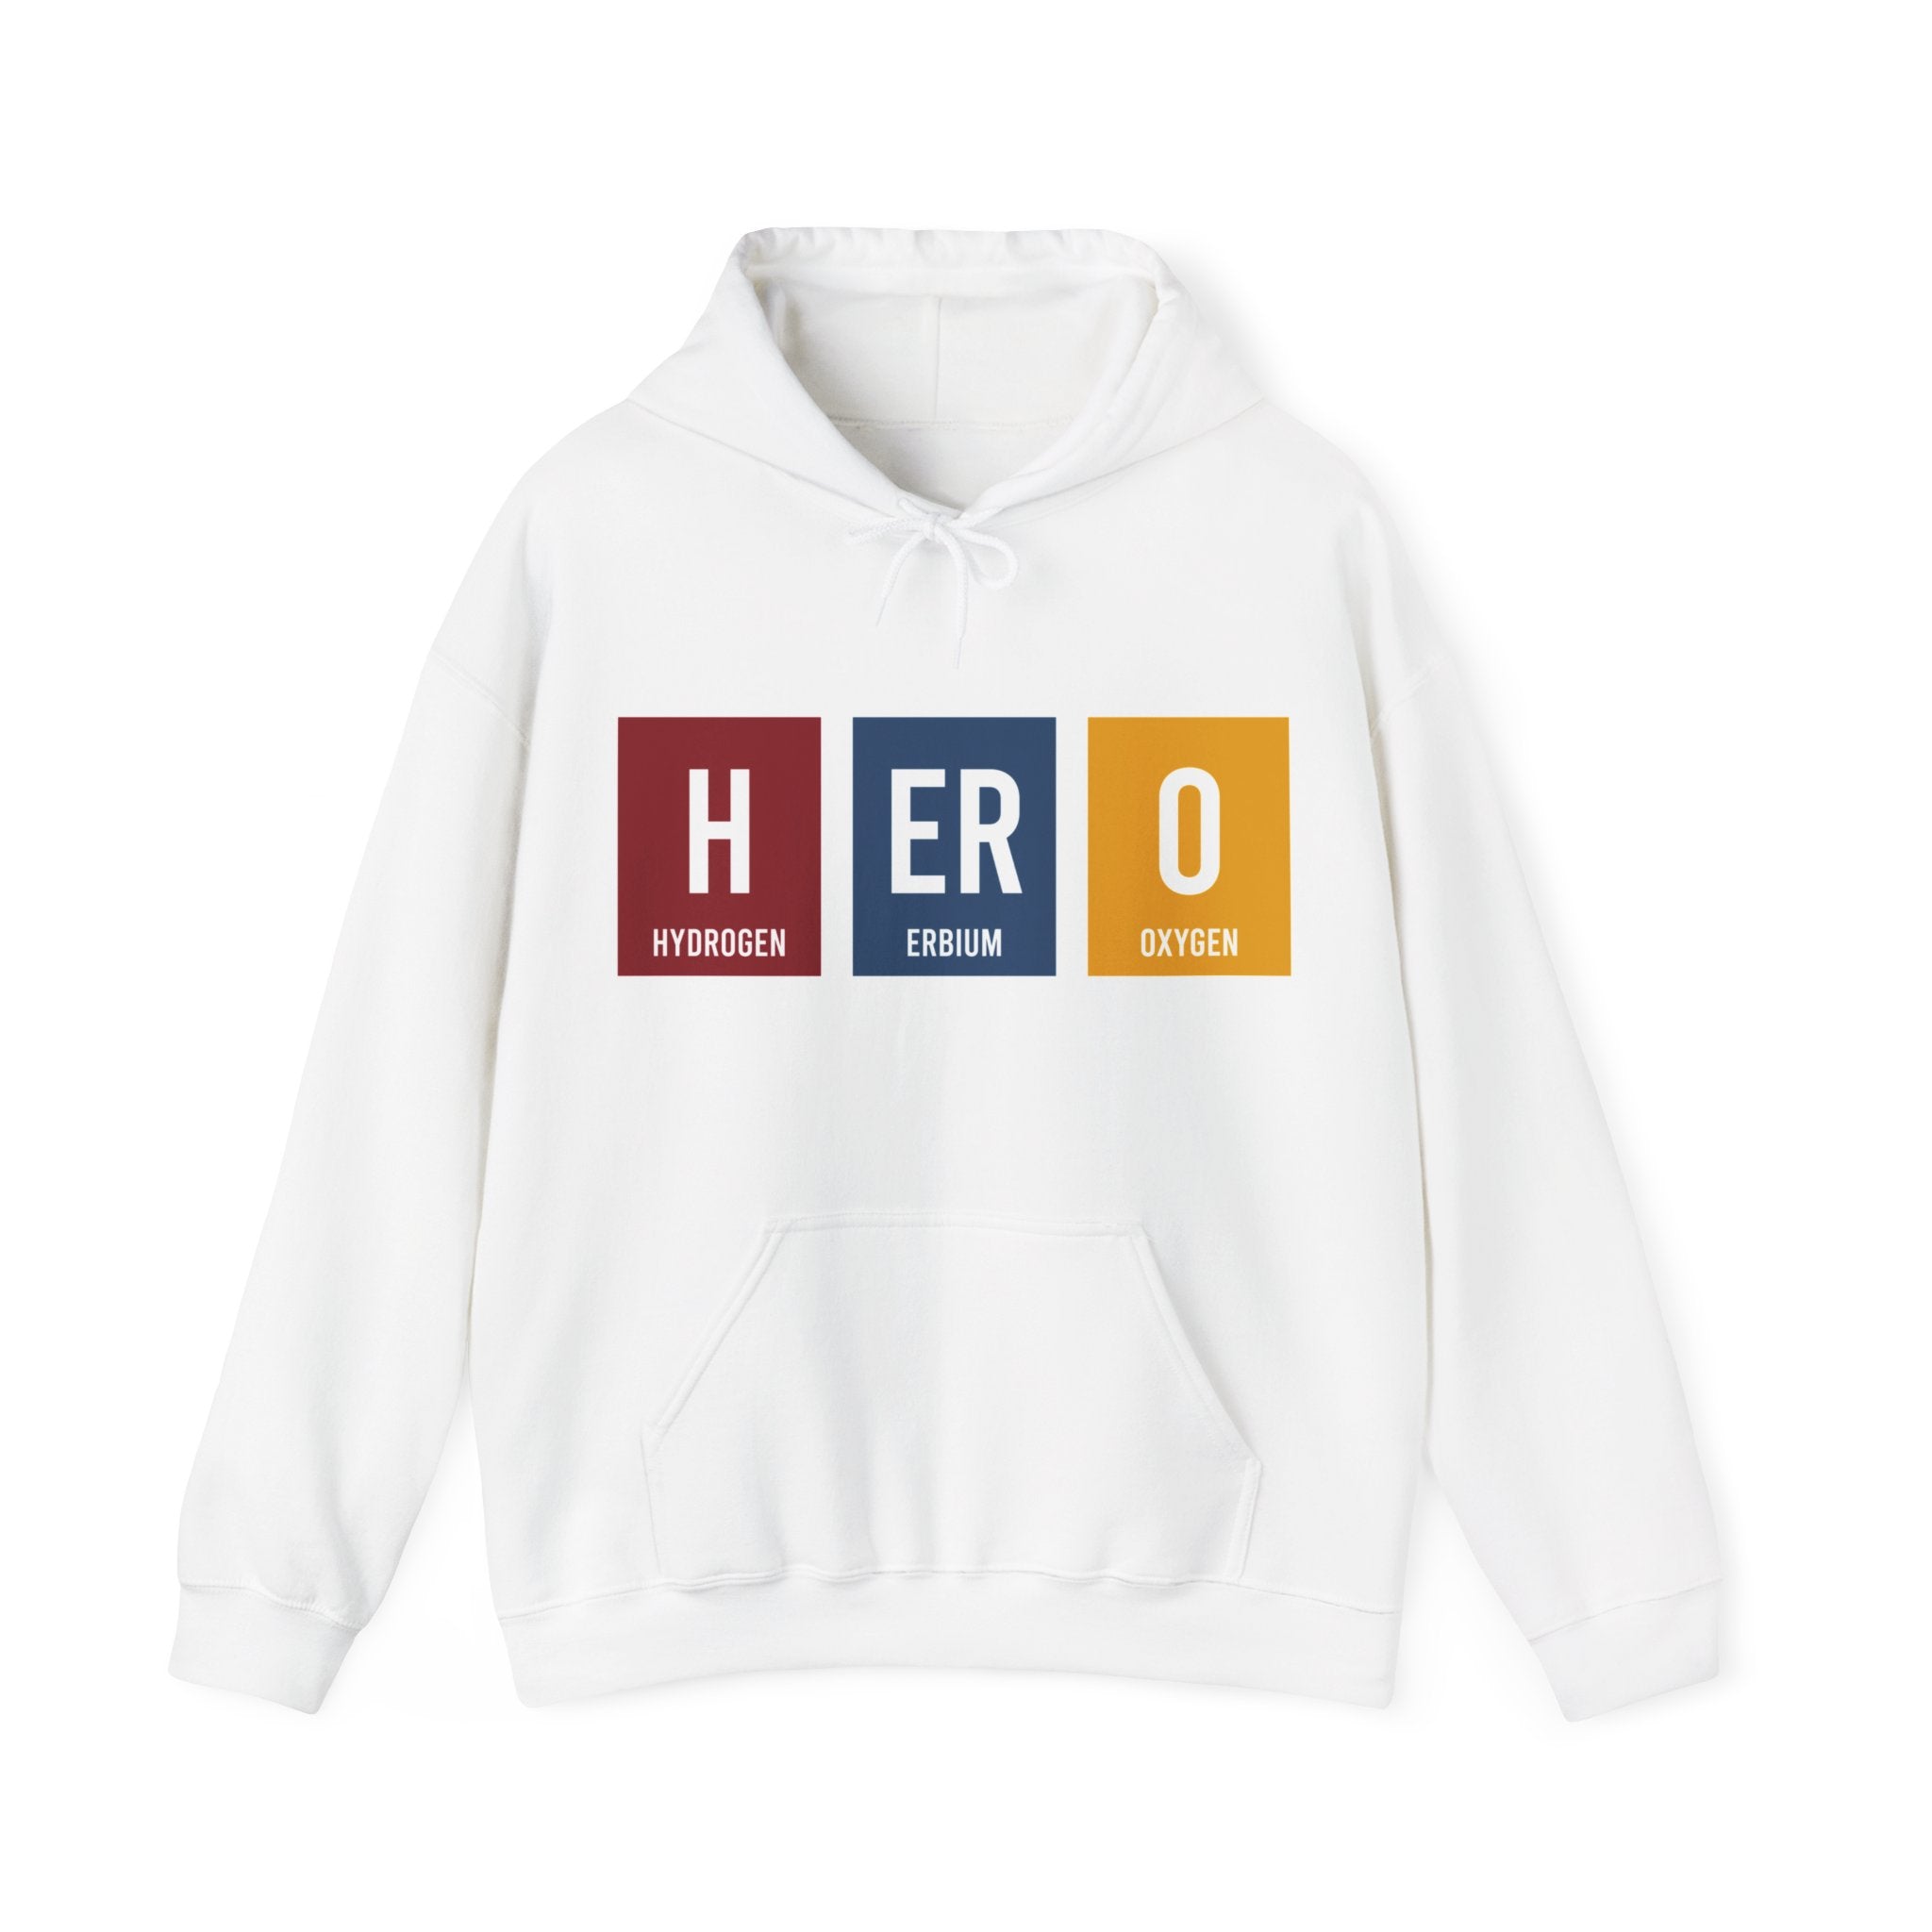 HERO - Hooded Sweatshirt displaying "HERO" with each letter colored differently and represented by scientific elements: Hydrogen (H), Erbium (Er), and Oxygen (O). This unique HERO design celebrates heroism through the language of chemistry.